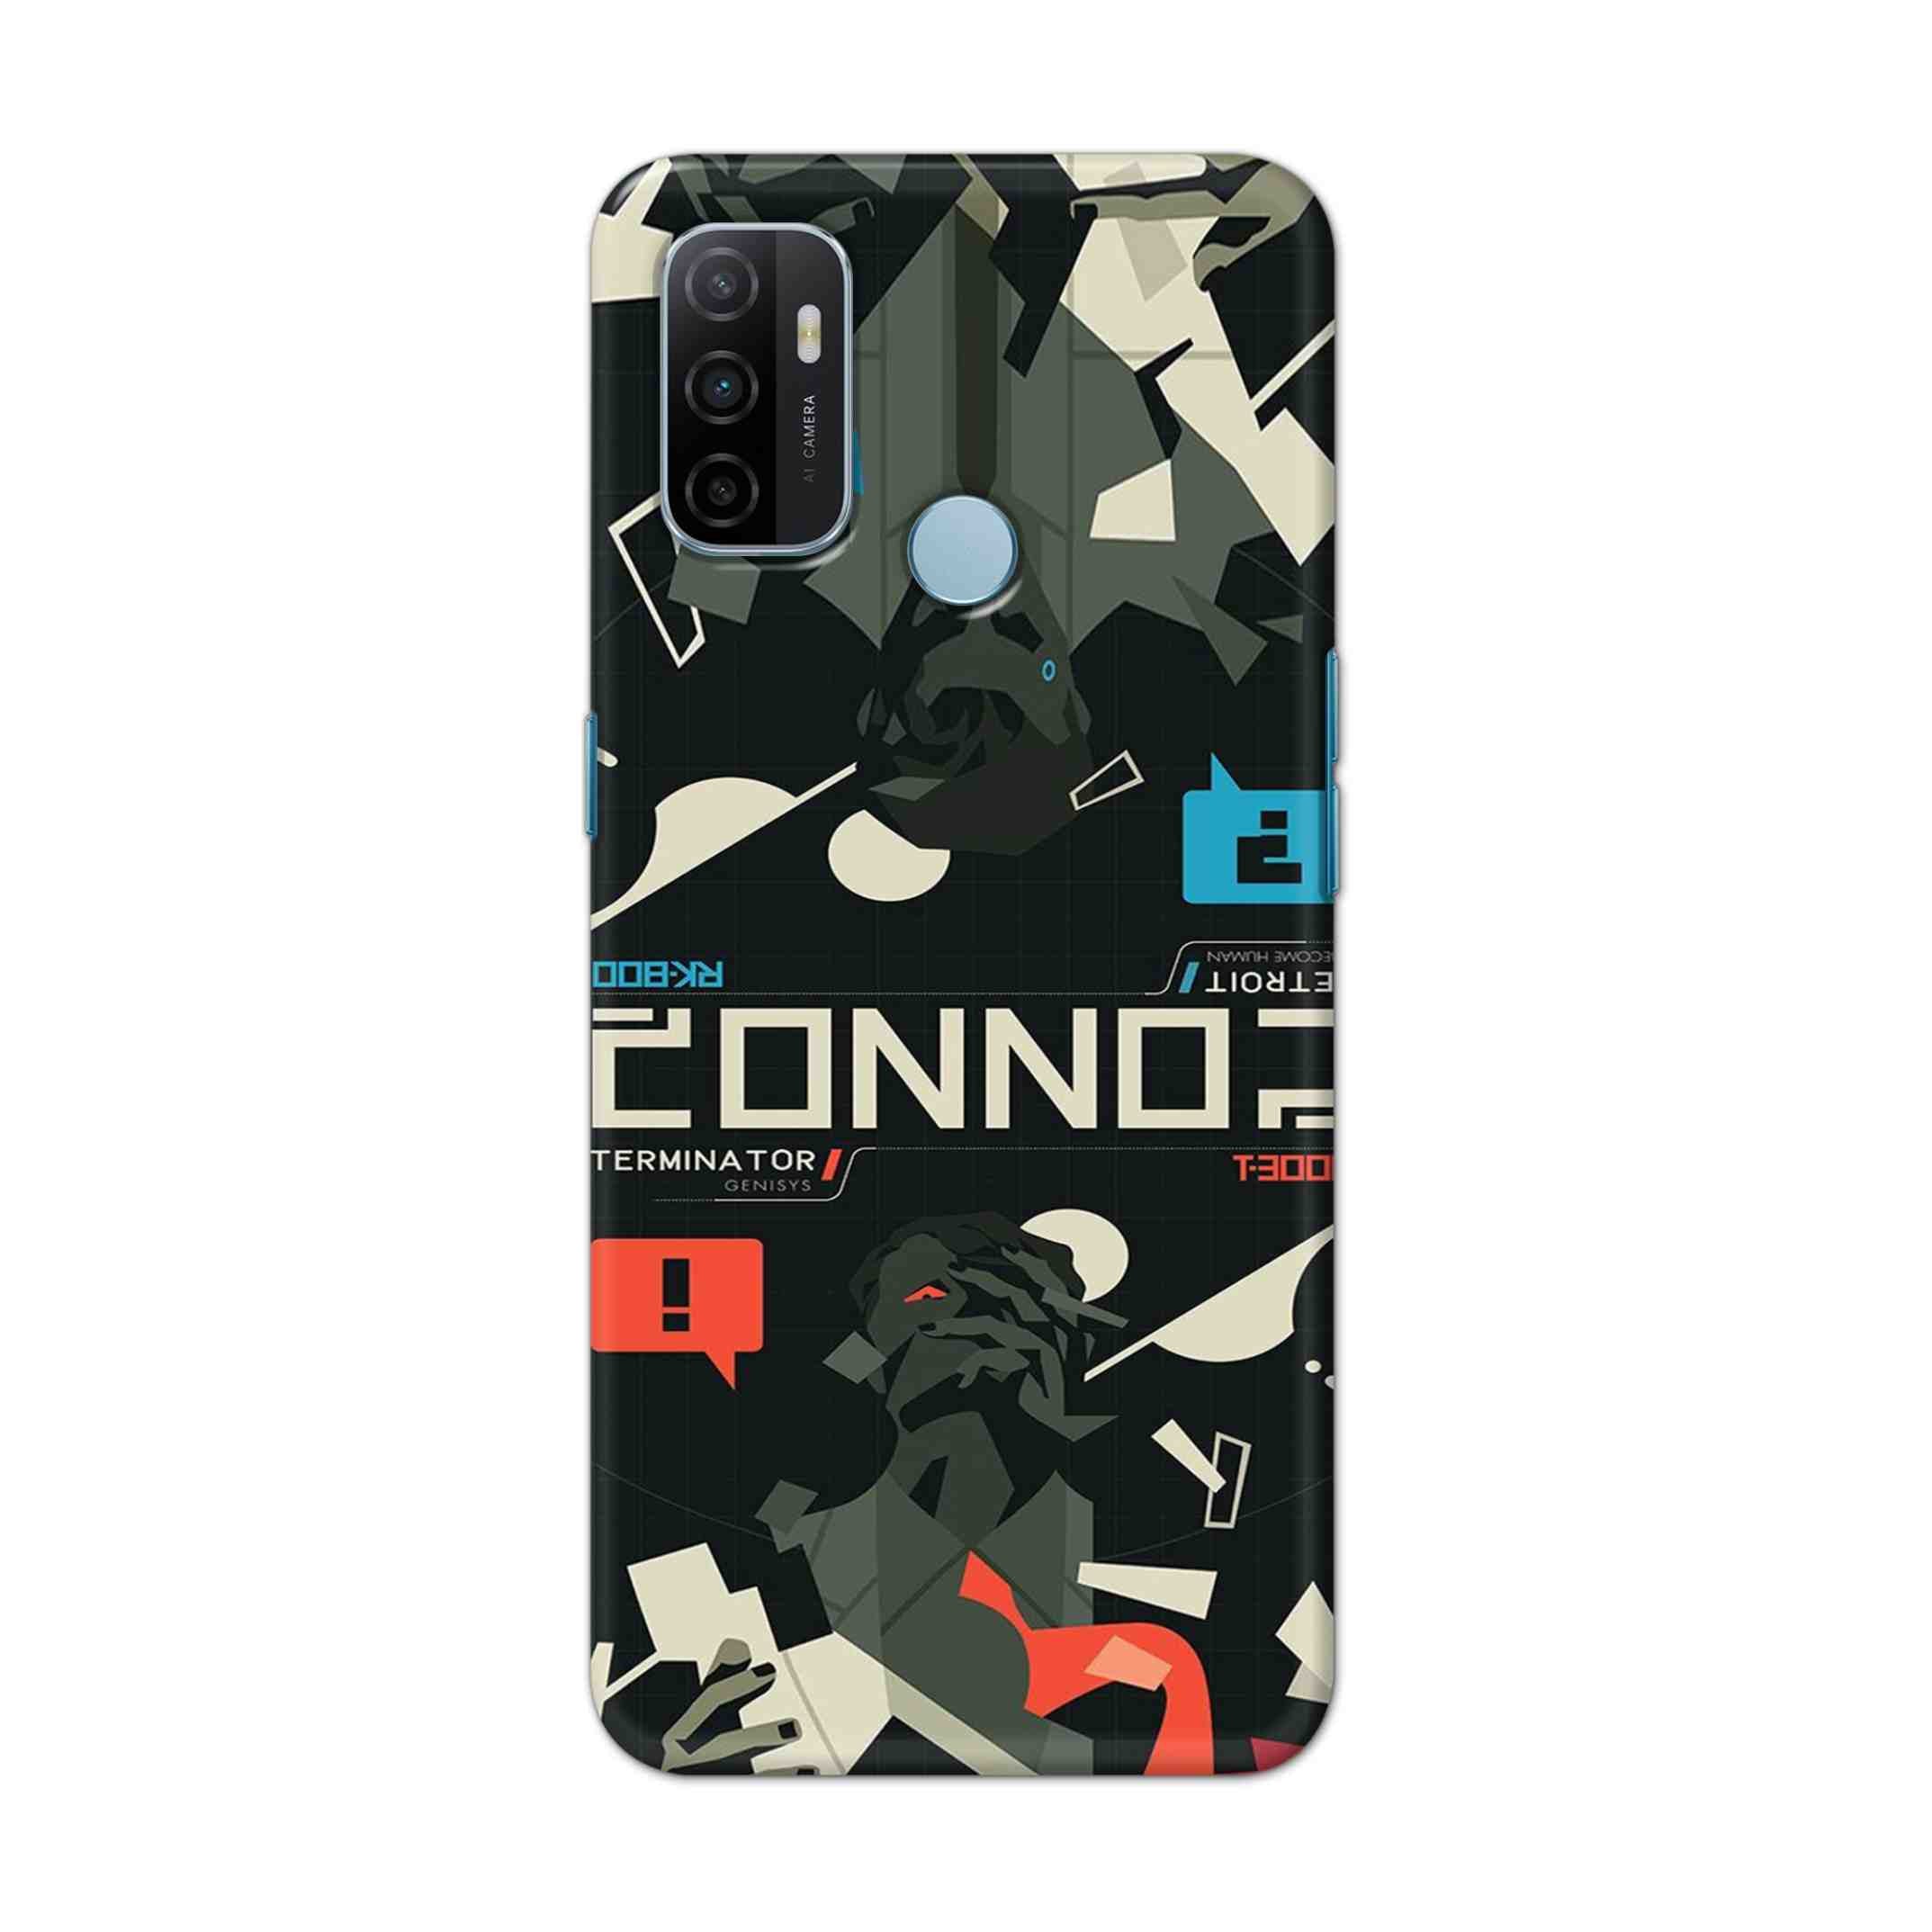 Buy Terminator Hard Back Mobile Phone Case Cover For OPPO A53 (2020) Online